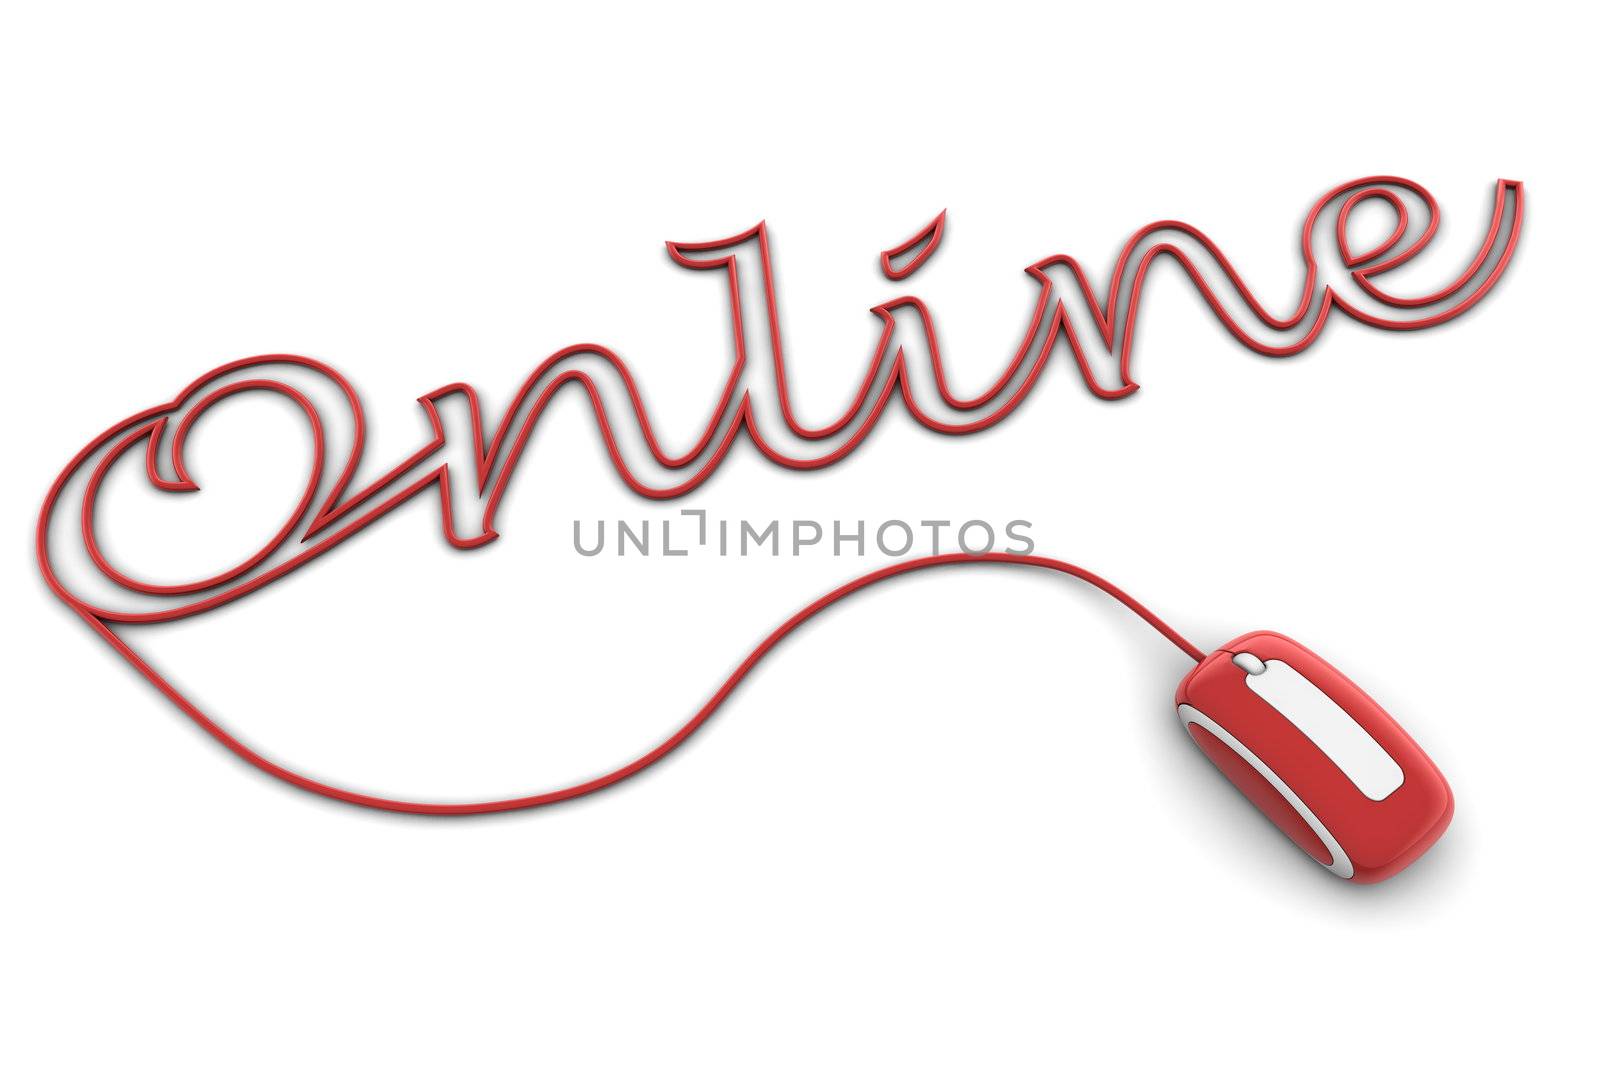 modern glossy red computer mouse is connected to the shiny red word Online - letters are formed by the mouse cable